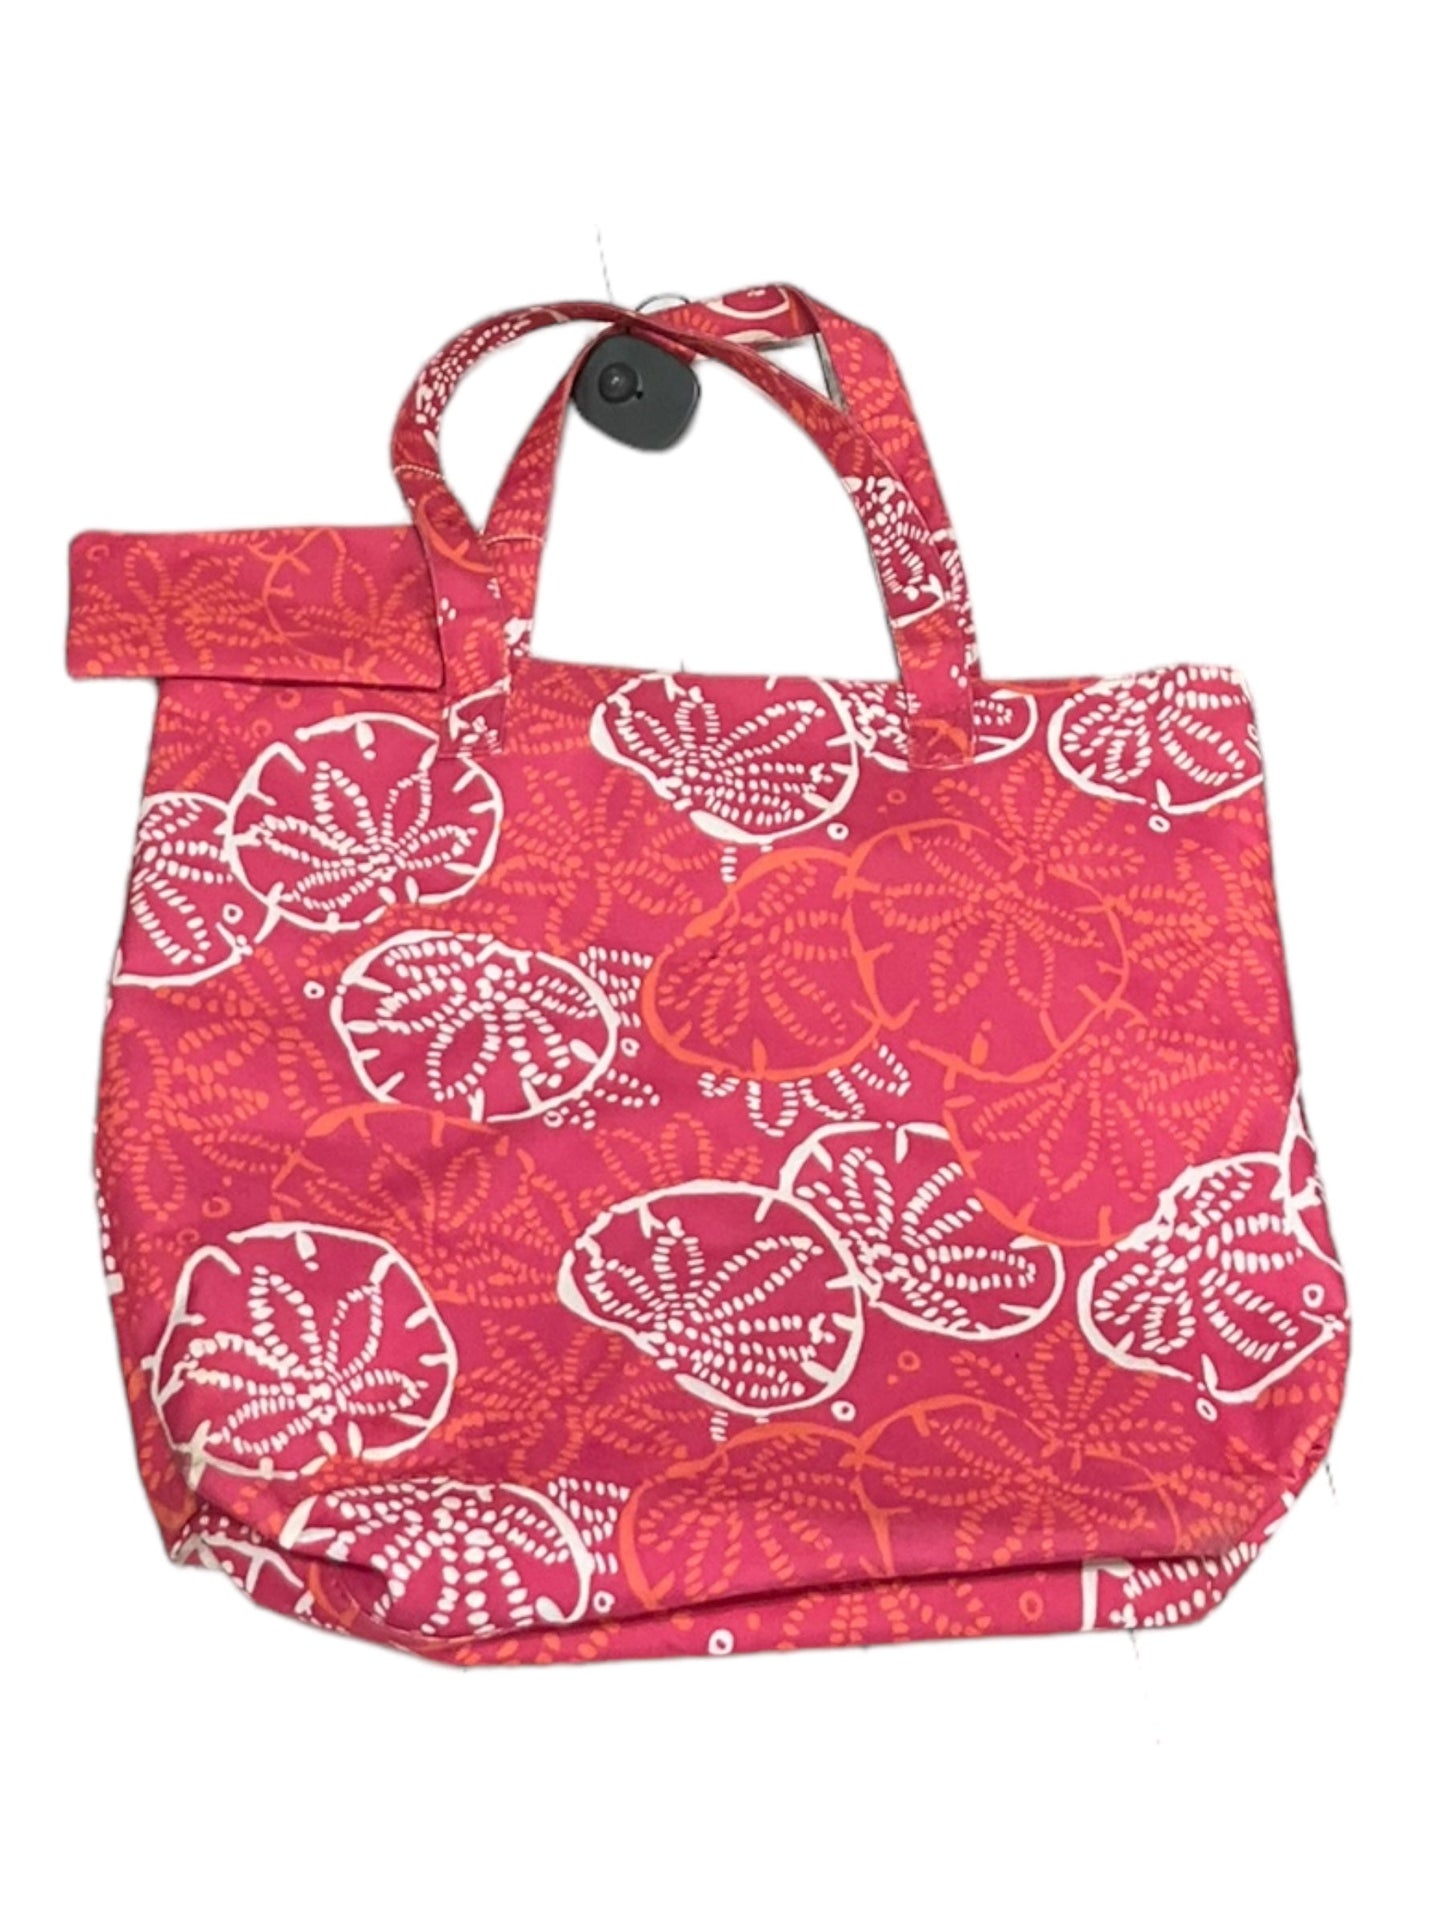 Tote Lilly Pulitzer, Size Large